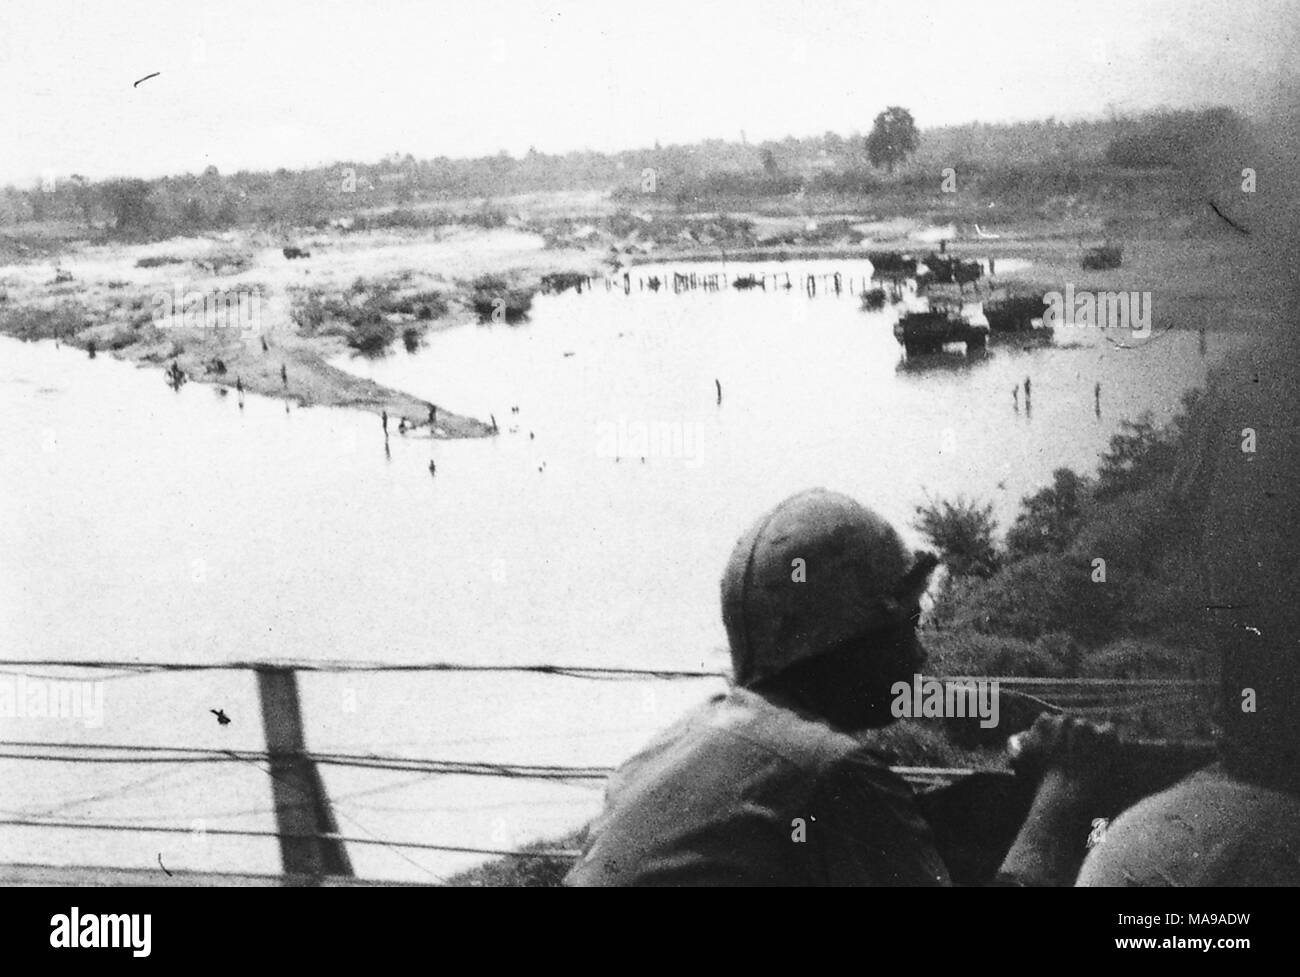 Black and white photograph, showing the back of a helmeted soldier, presumably riding in a truck over a bridge, with a body of water, boats, flat land, and trees in the background, photographed in Vietnam during the Vietnam War (1955-1975), 1971. () Stock Photo